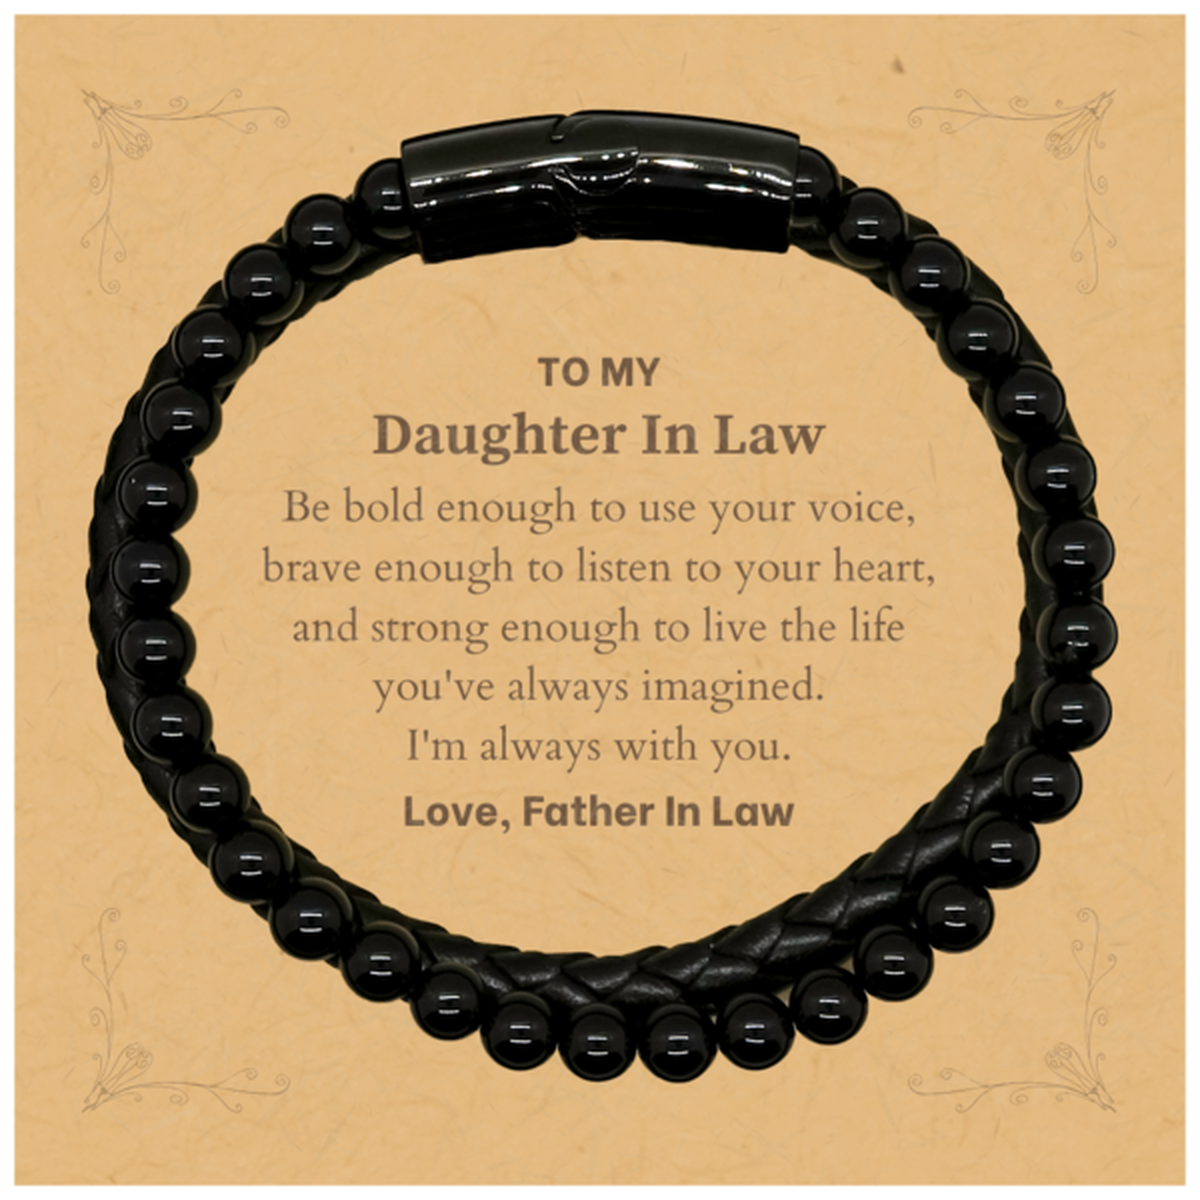 Keepsake Daughter In Law Stone Leather Bracelets Gift Idea Graduation Christmas Birthday Daughter In Law from Father In Law, Daughter In Law Be bold enough to use your voice, brave enough to listen to your heart. Love, Father In Law